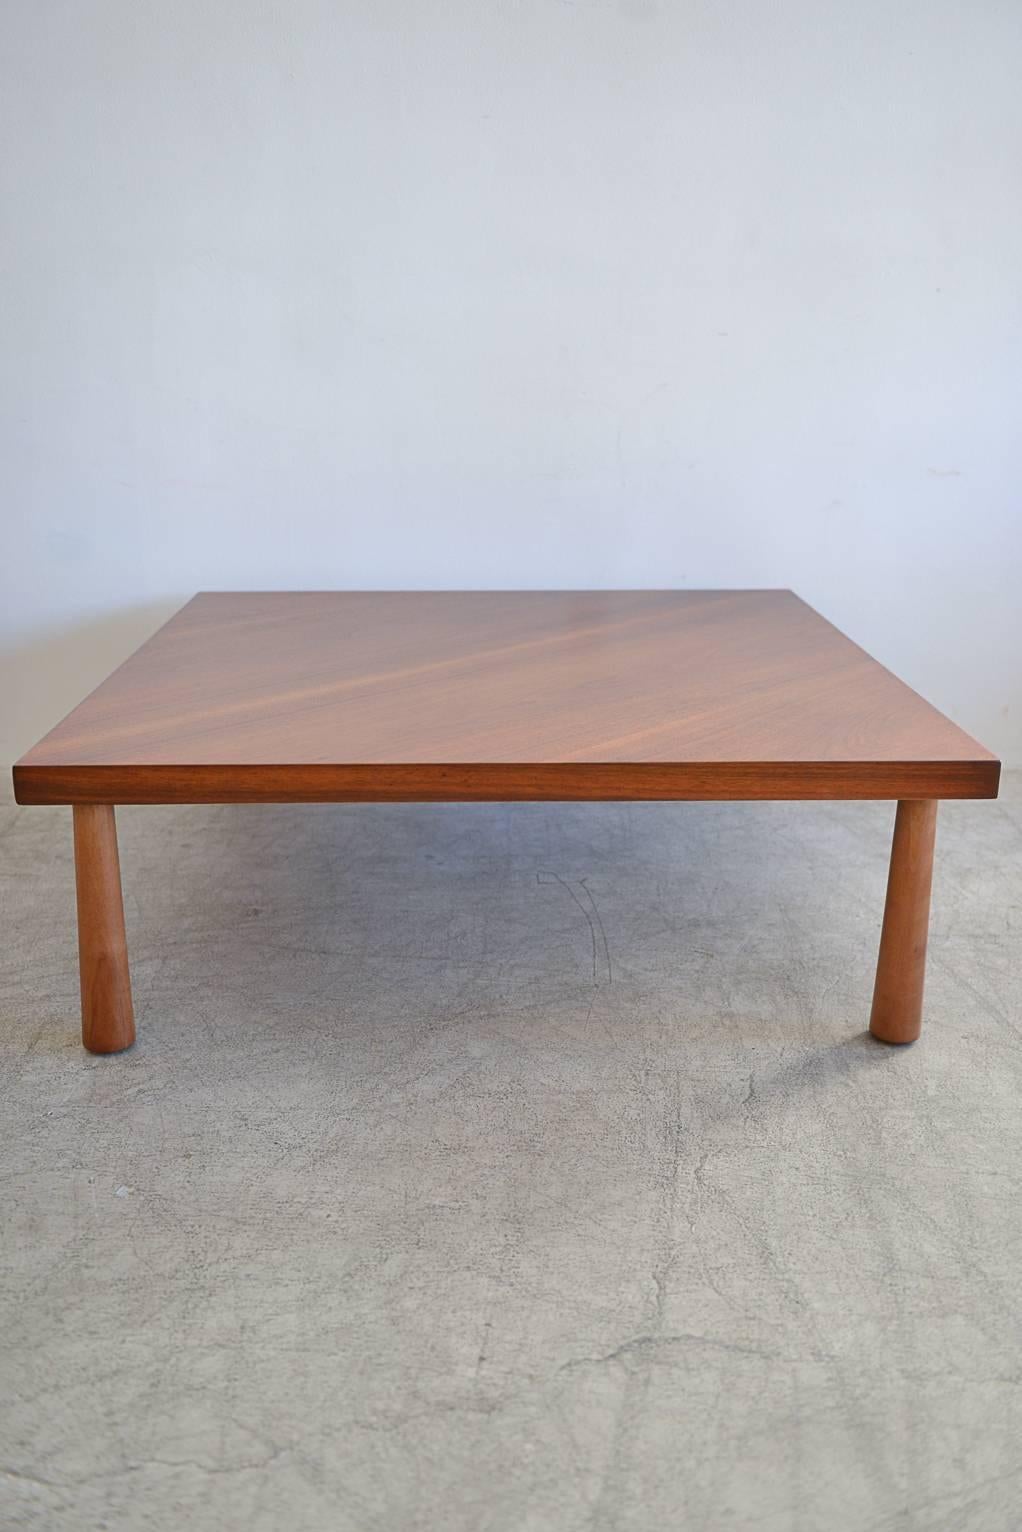 This is model 1636 from Widdicomb Furniture Company, designed by T.H. Robsjohn-Gibbings. Rare bias cut walnut top with inverted cone solid walnut legs. Table has been meticulously restored in showroom condition. Marked on underside. Made in